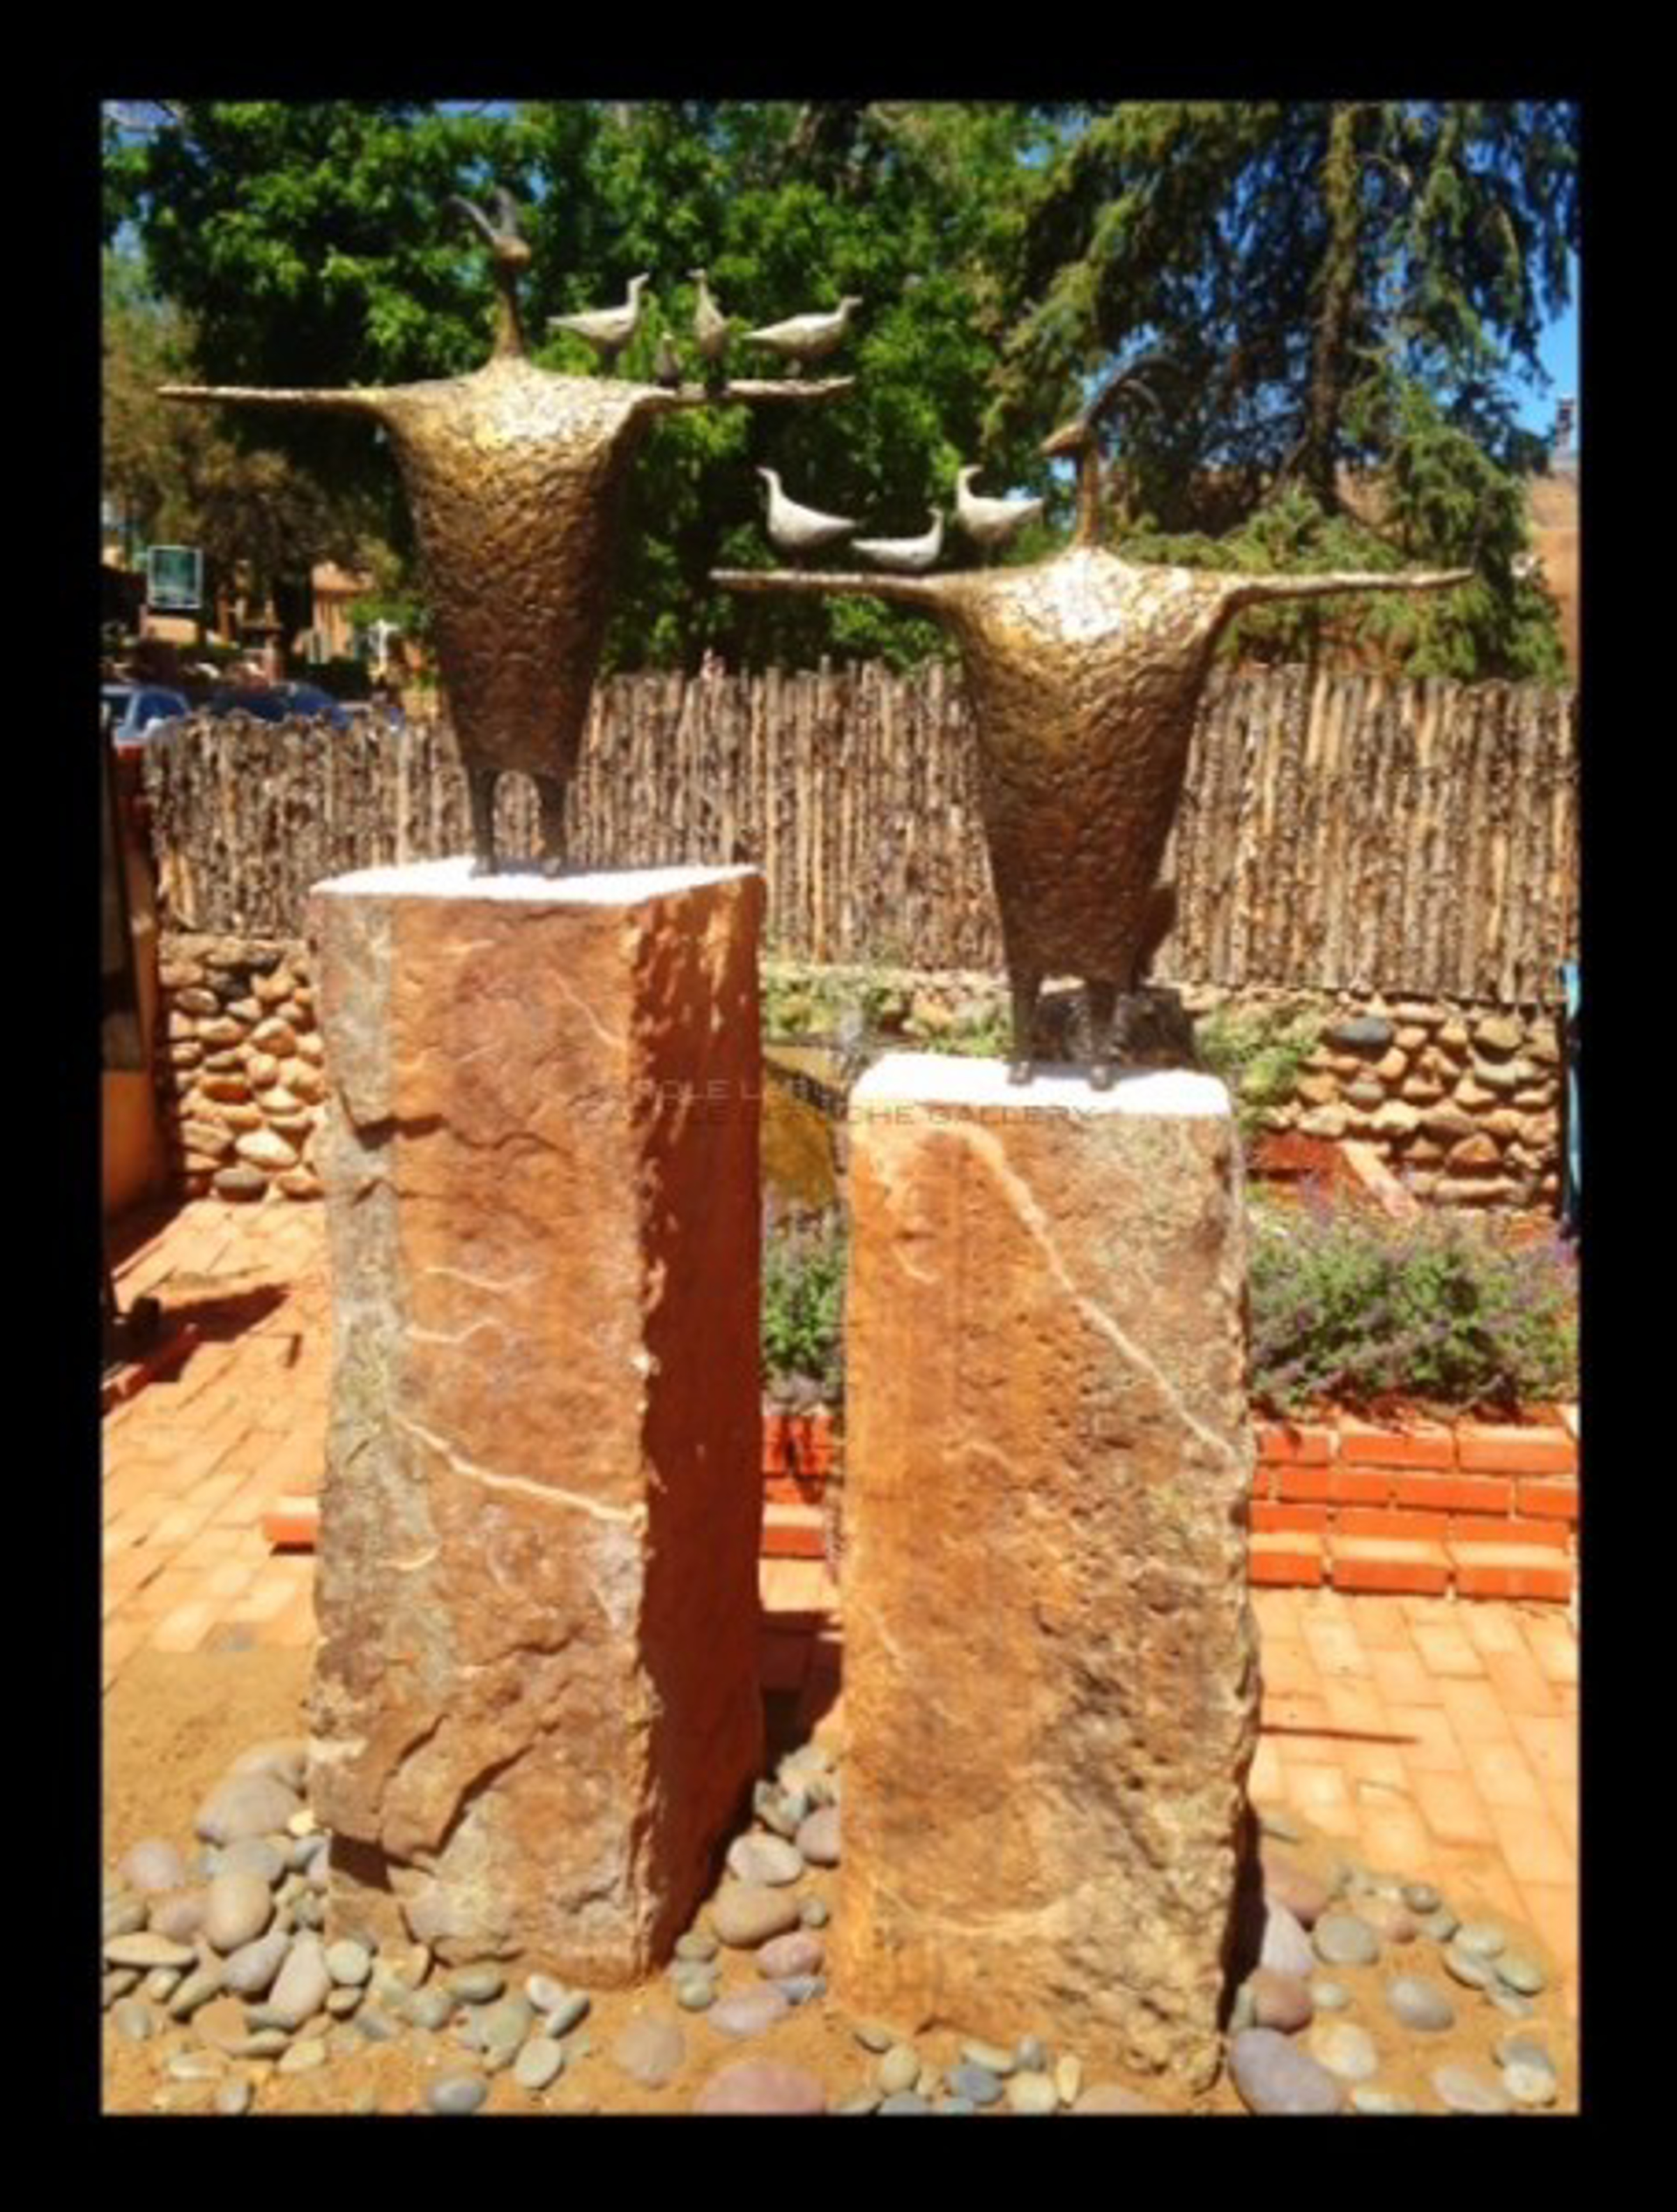 PROTECTORS OF THE MIGRATION Sculptures 34"x33"x10" $7500 each Two Rock Pedestals $7500 OR Two Sculptures with Two Rock Pedestals $22,300. May be purchased separately or together. by Jill Shwaiko